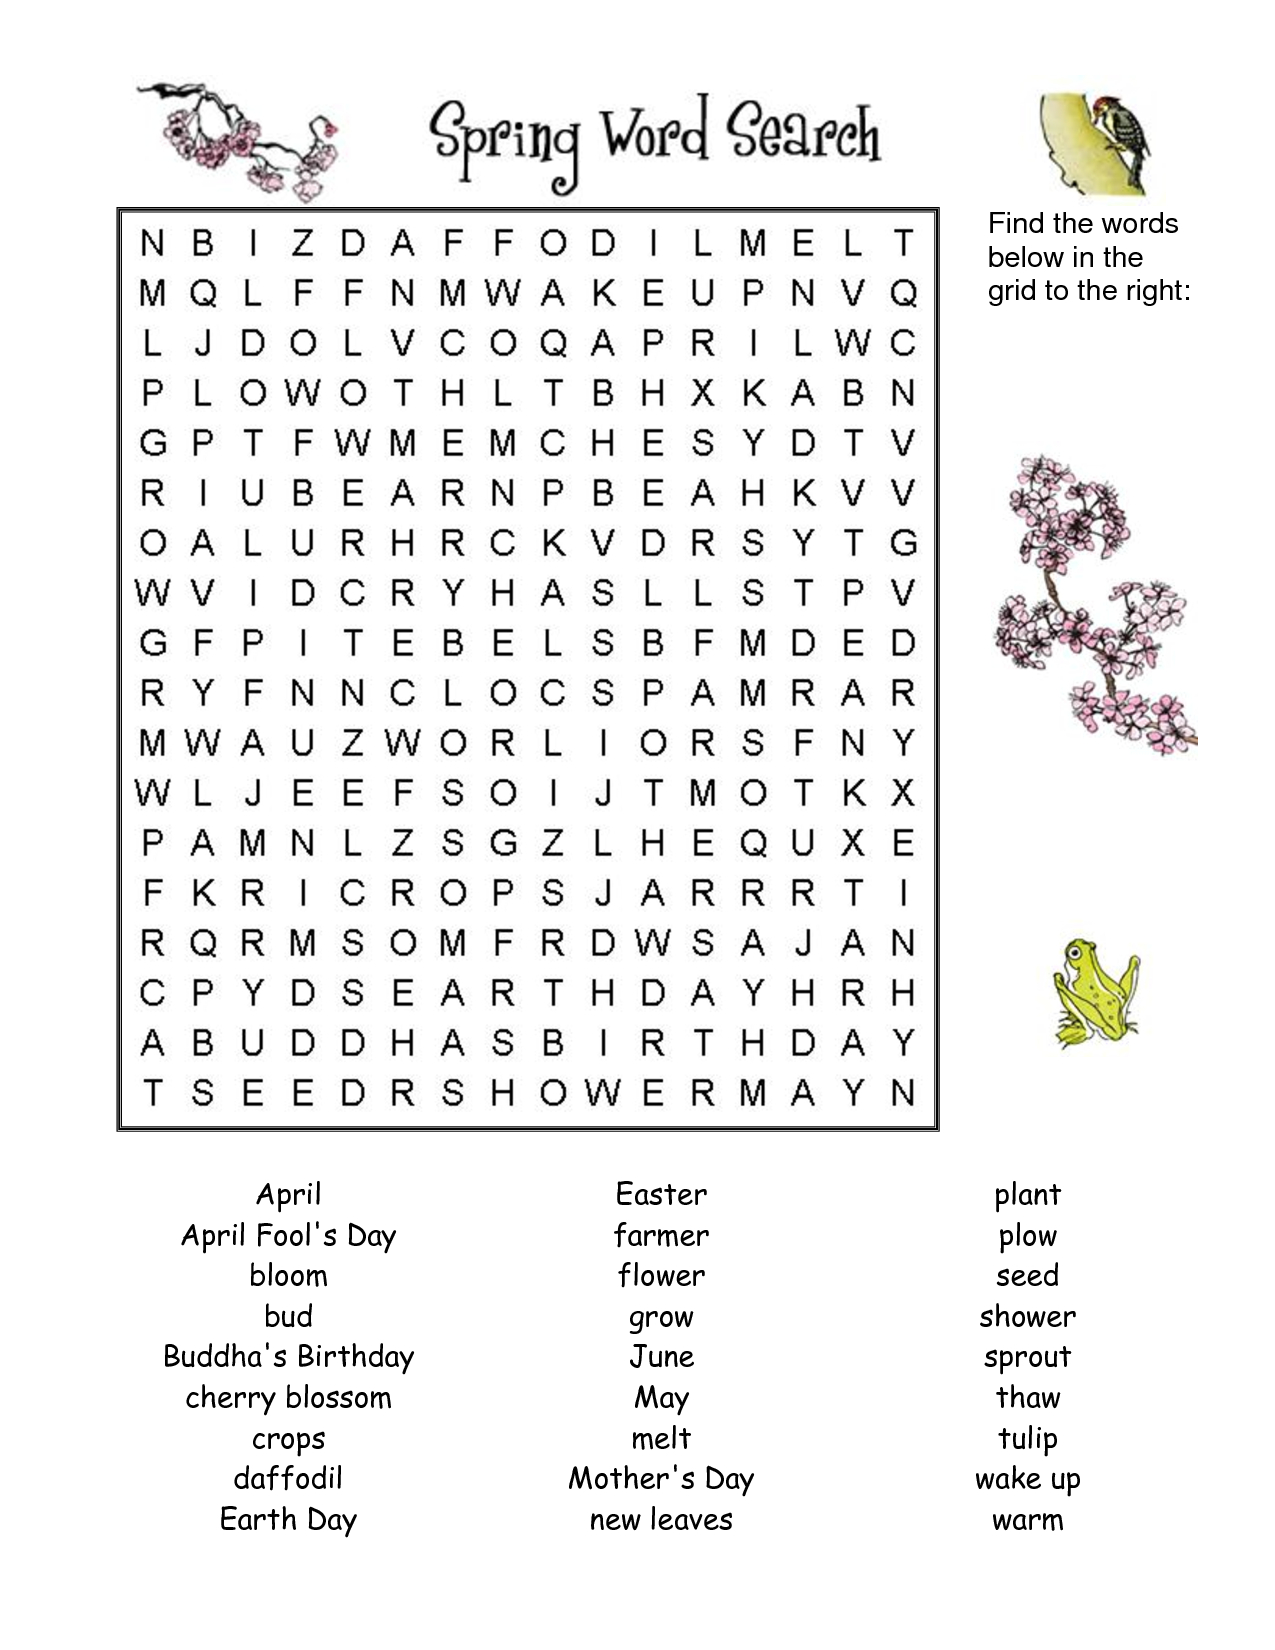 7 Printable Spring Word Searches | Kittybabylove - Printable Spring Puzzles